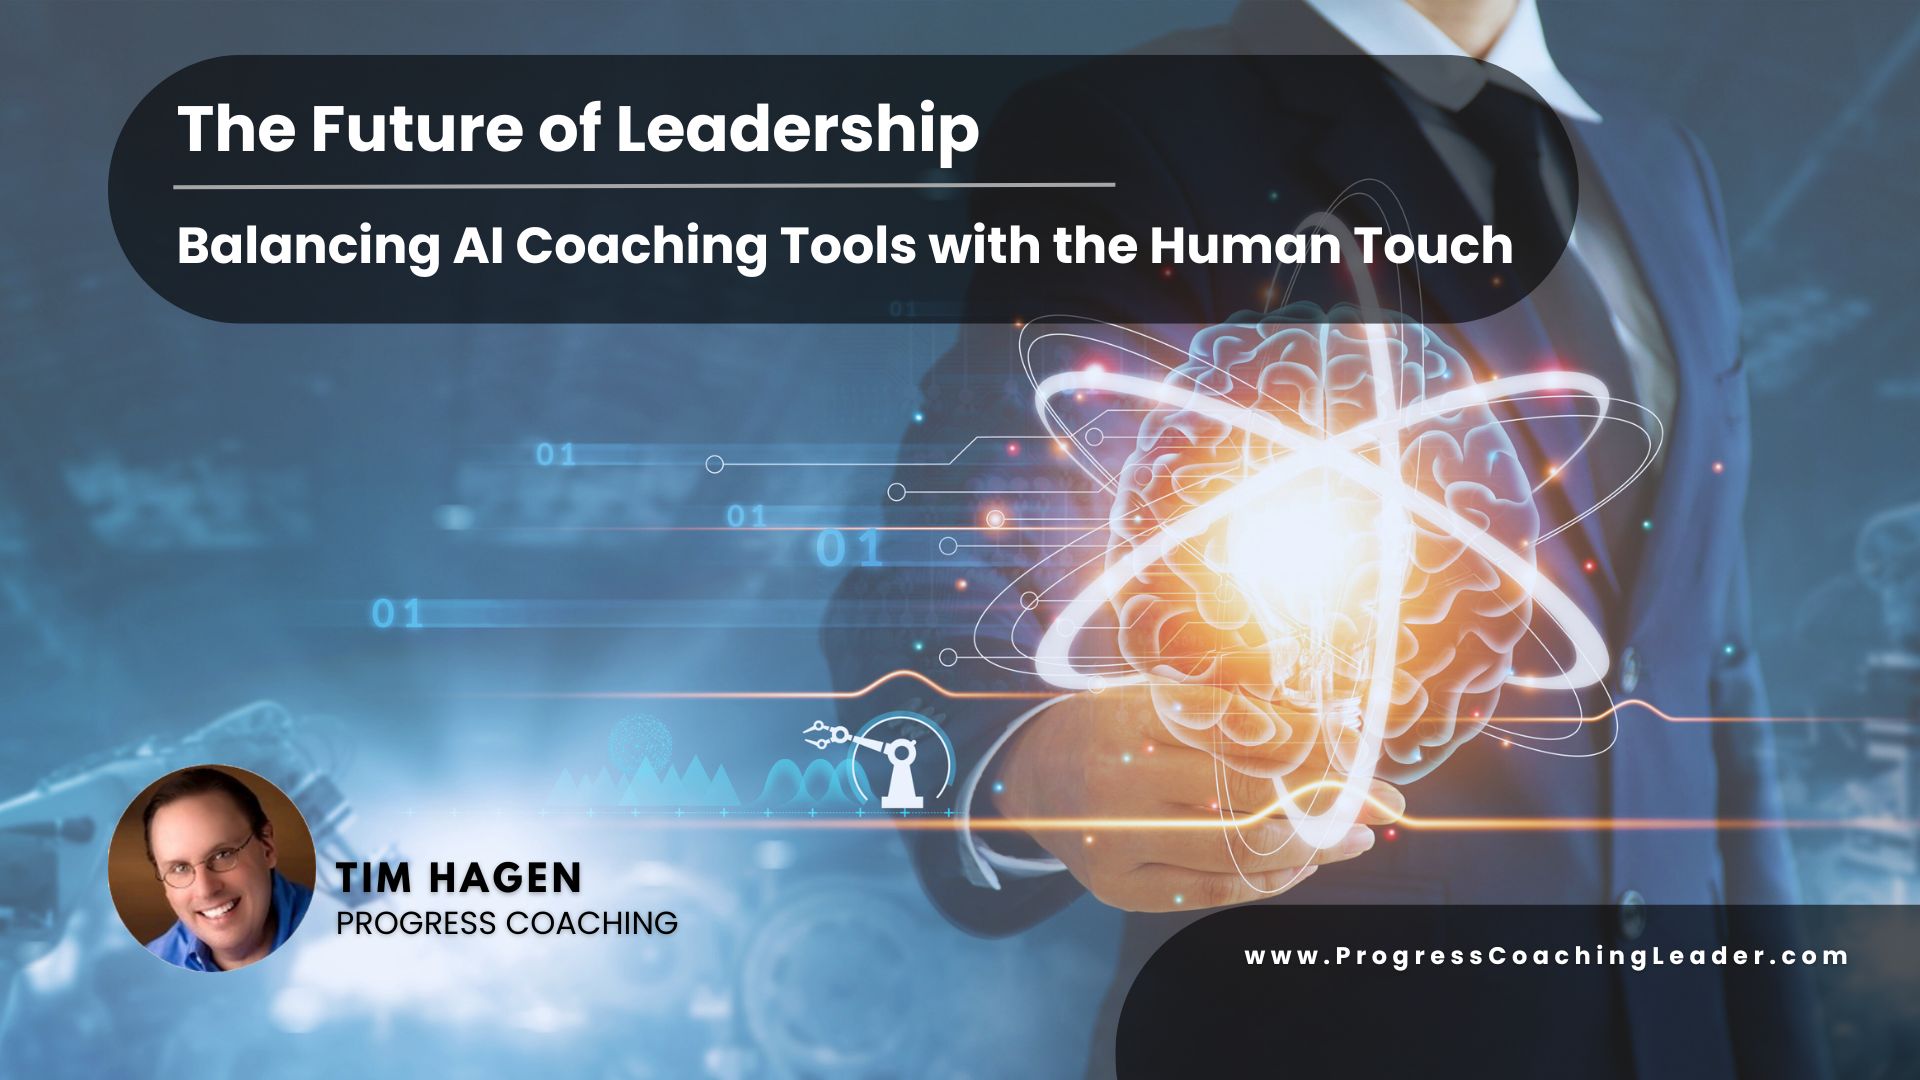 The Future of Leadership: Balancing AI Coaching Tools with the Human Touch